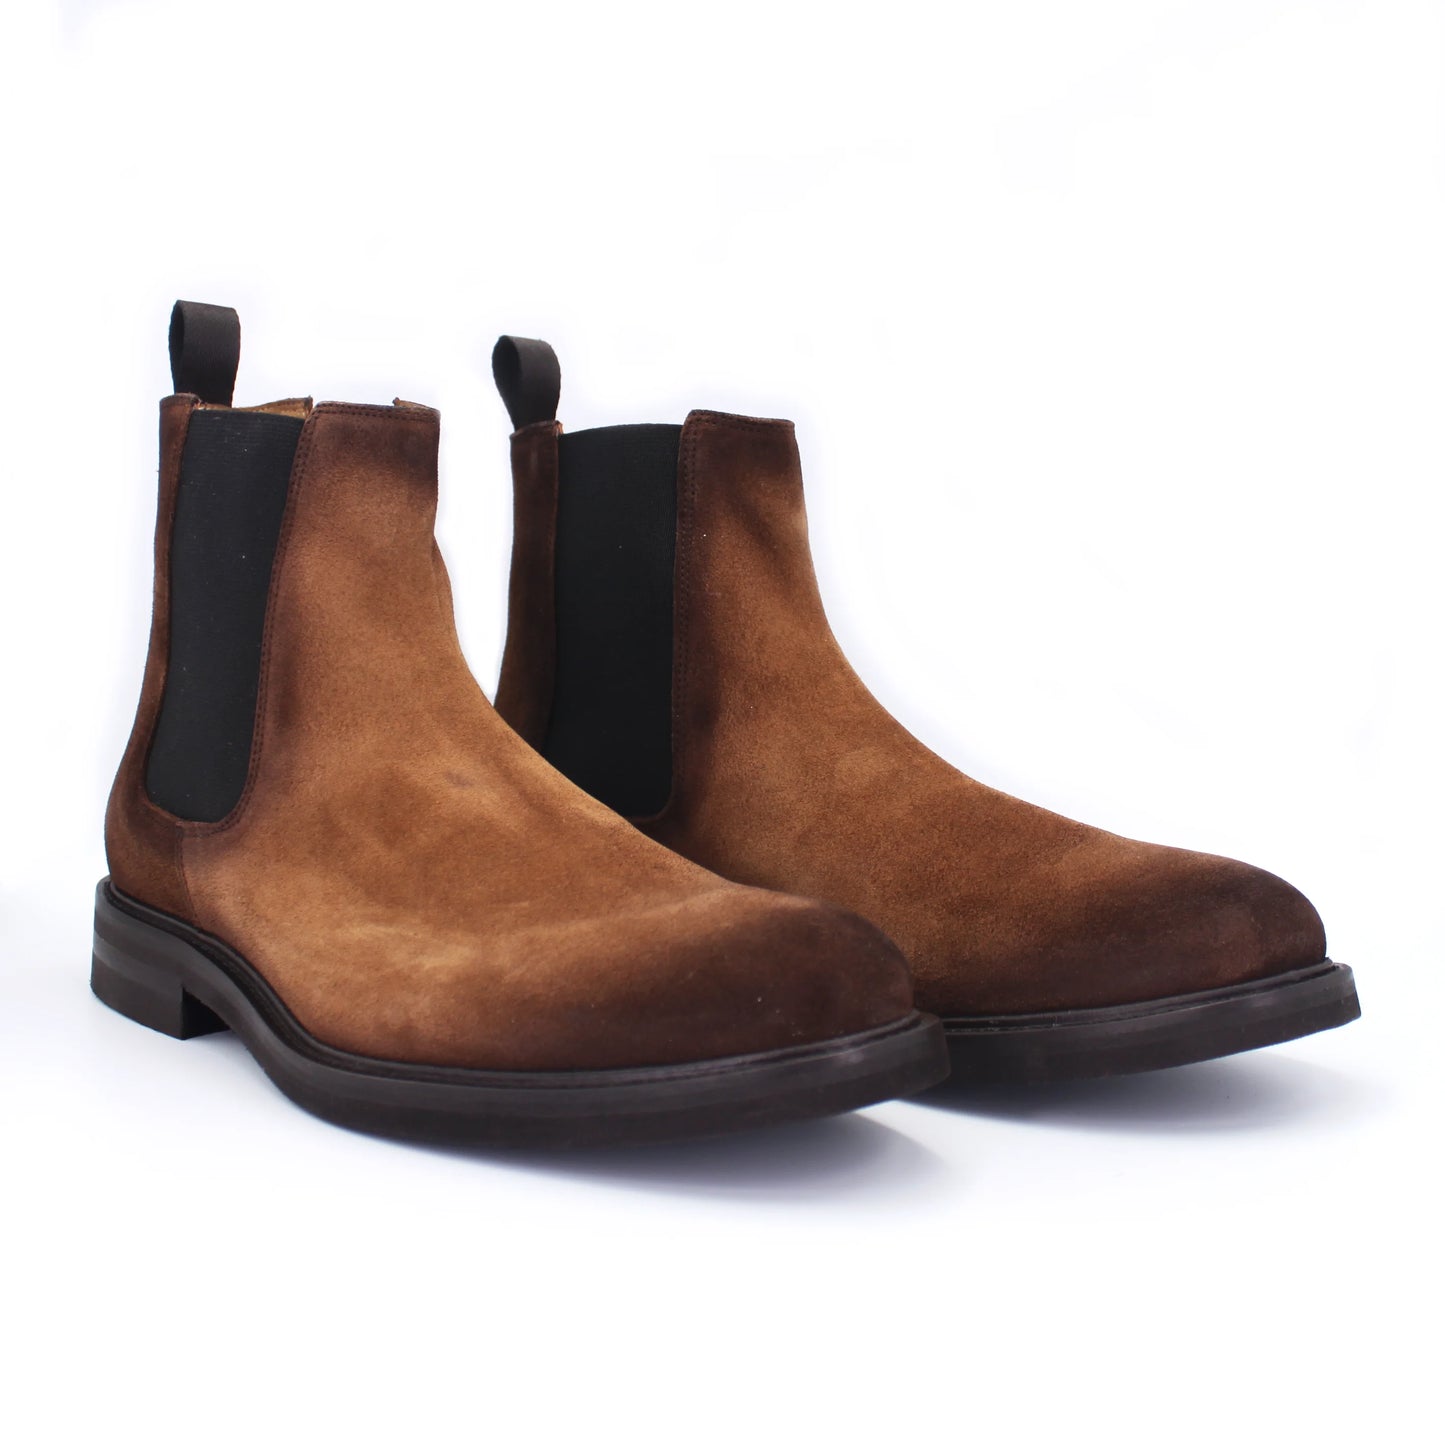 Shop Handmade Italian Leather Chealsea Boot in Tabacco (08589) or browse our range of hand-made Italian boots for men in leather or suede in-store at Aliverti Durban or Cape Town, or shop online. We deliver in South Africa & offer multiple payment plans as well as accept multiple safe & secure payment methods.